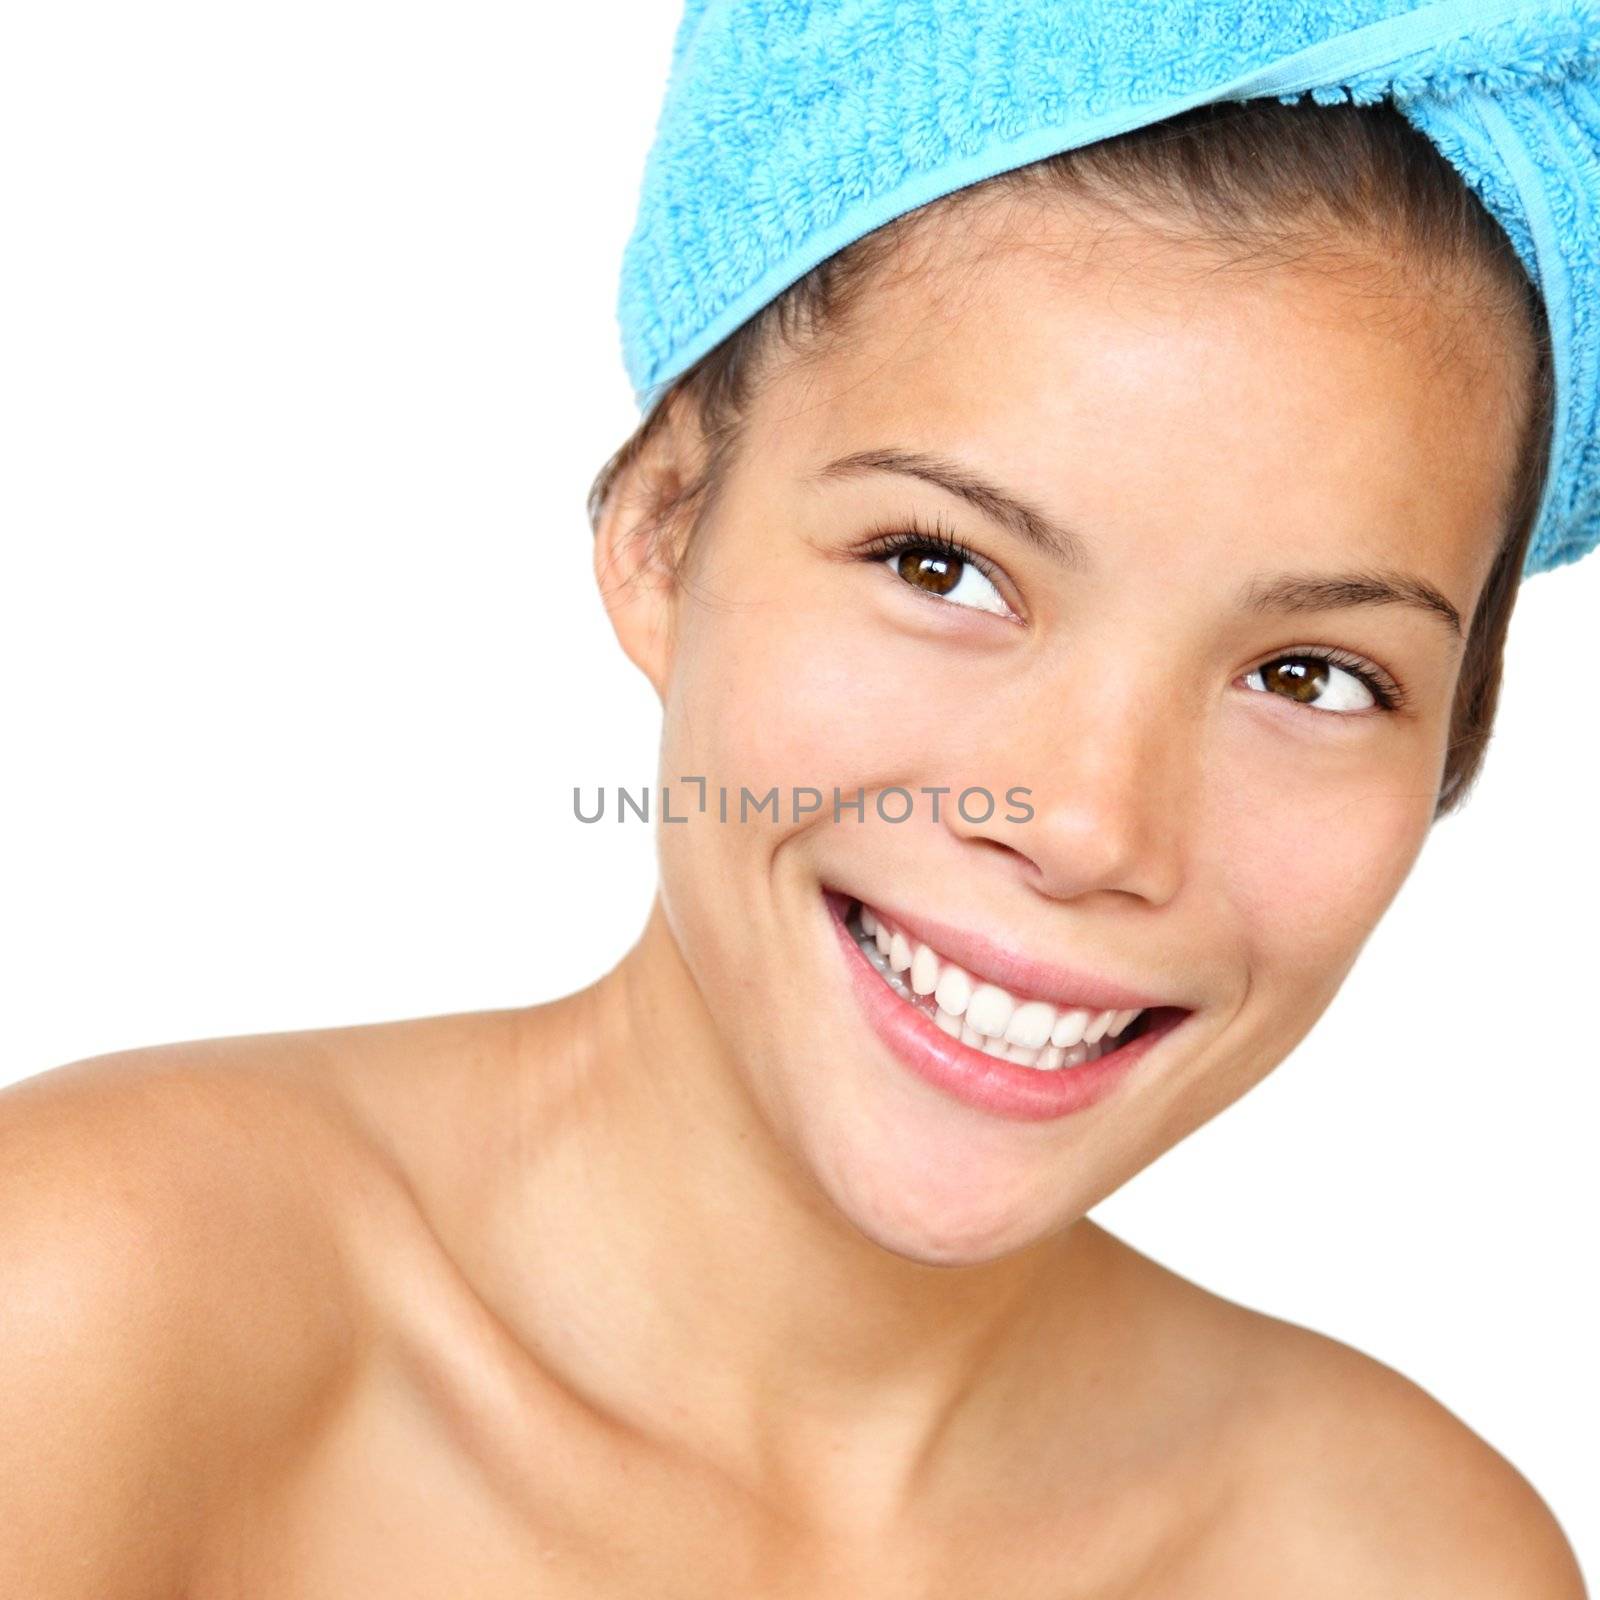 Towel and shower beauty.Smiling healthy looking woman with towels just out of the shower. Beautiful mixed asian / caucasian young woman model. Isolated on white background.